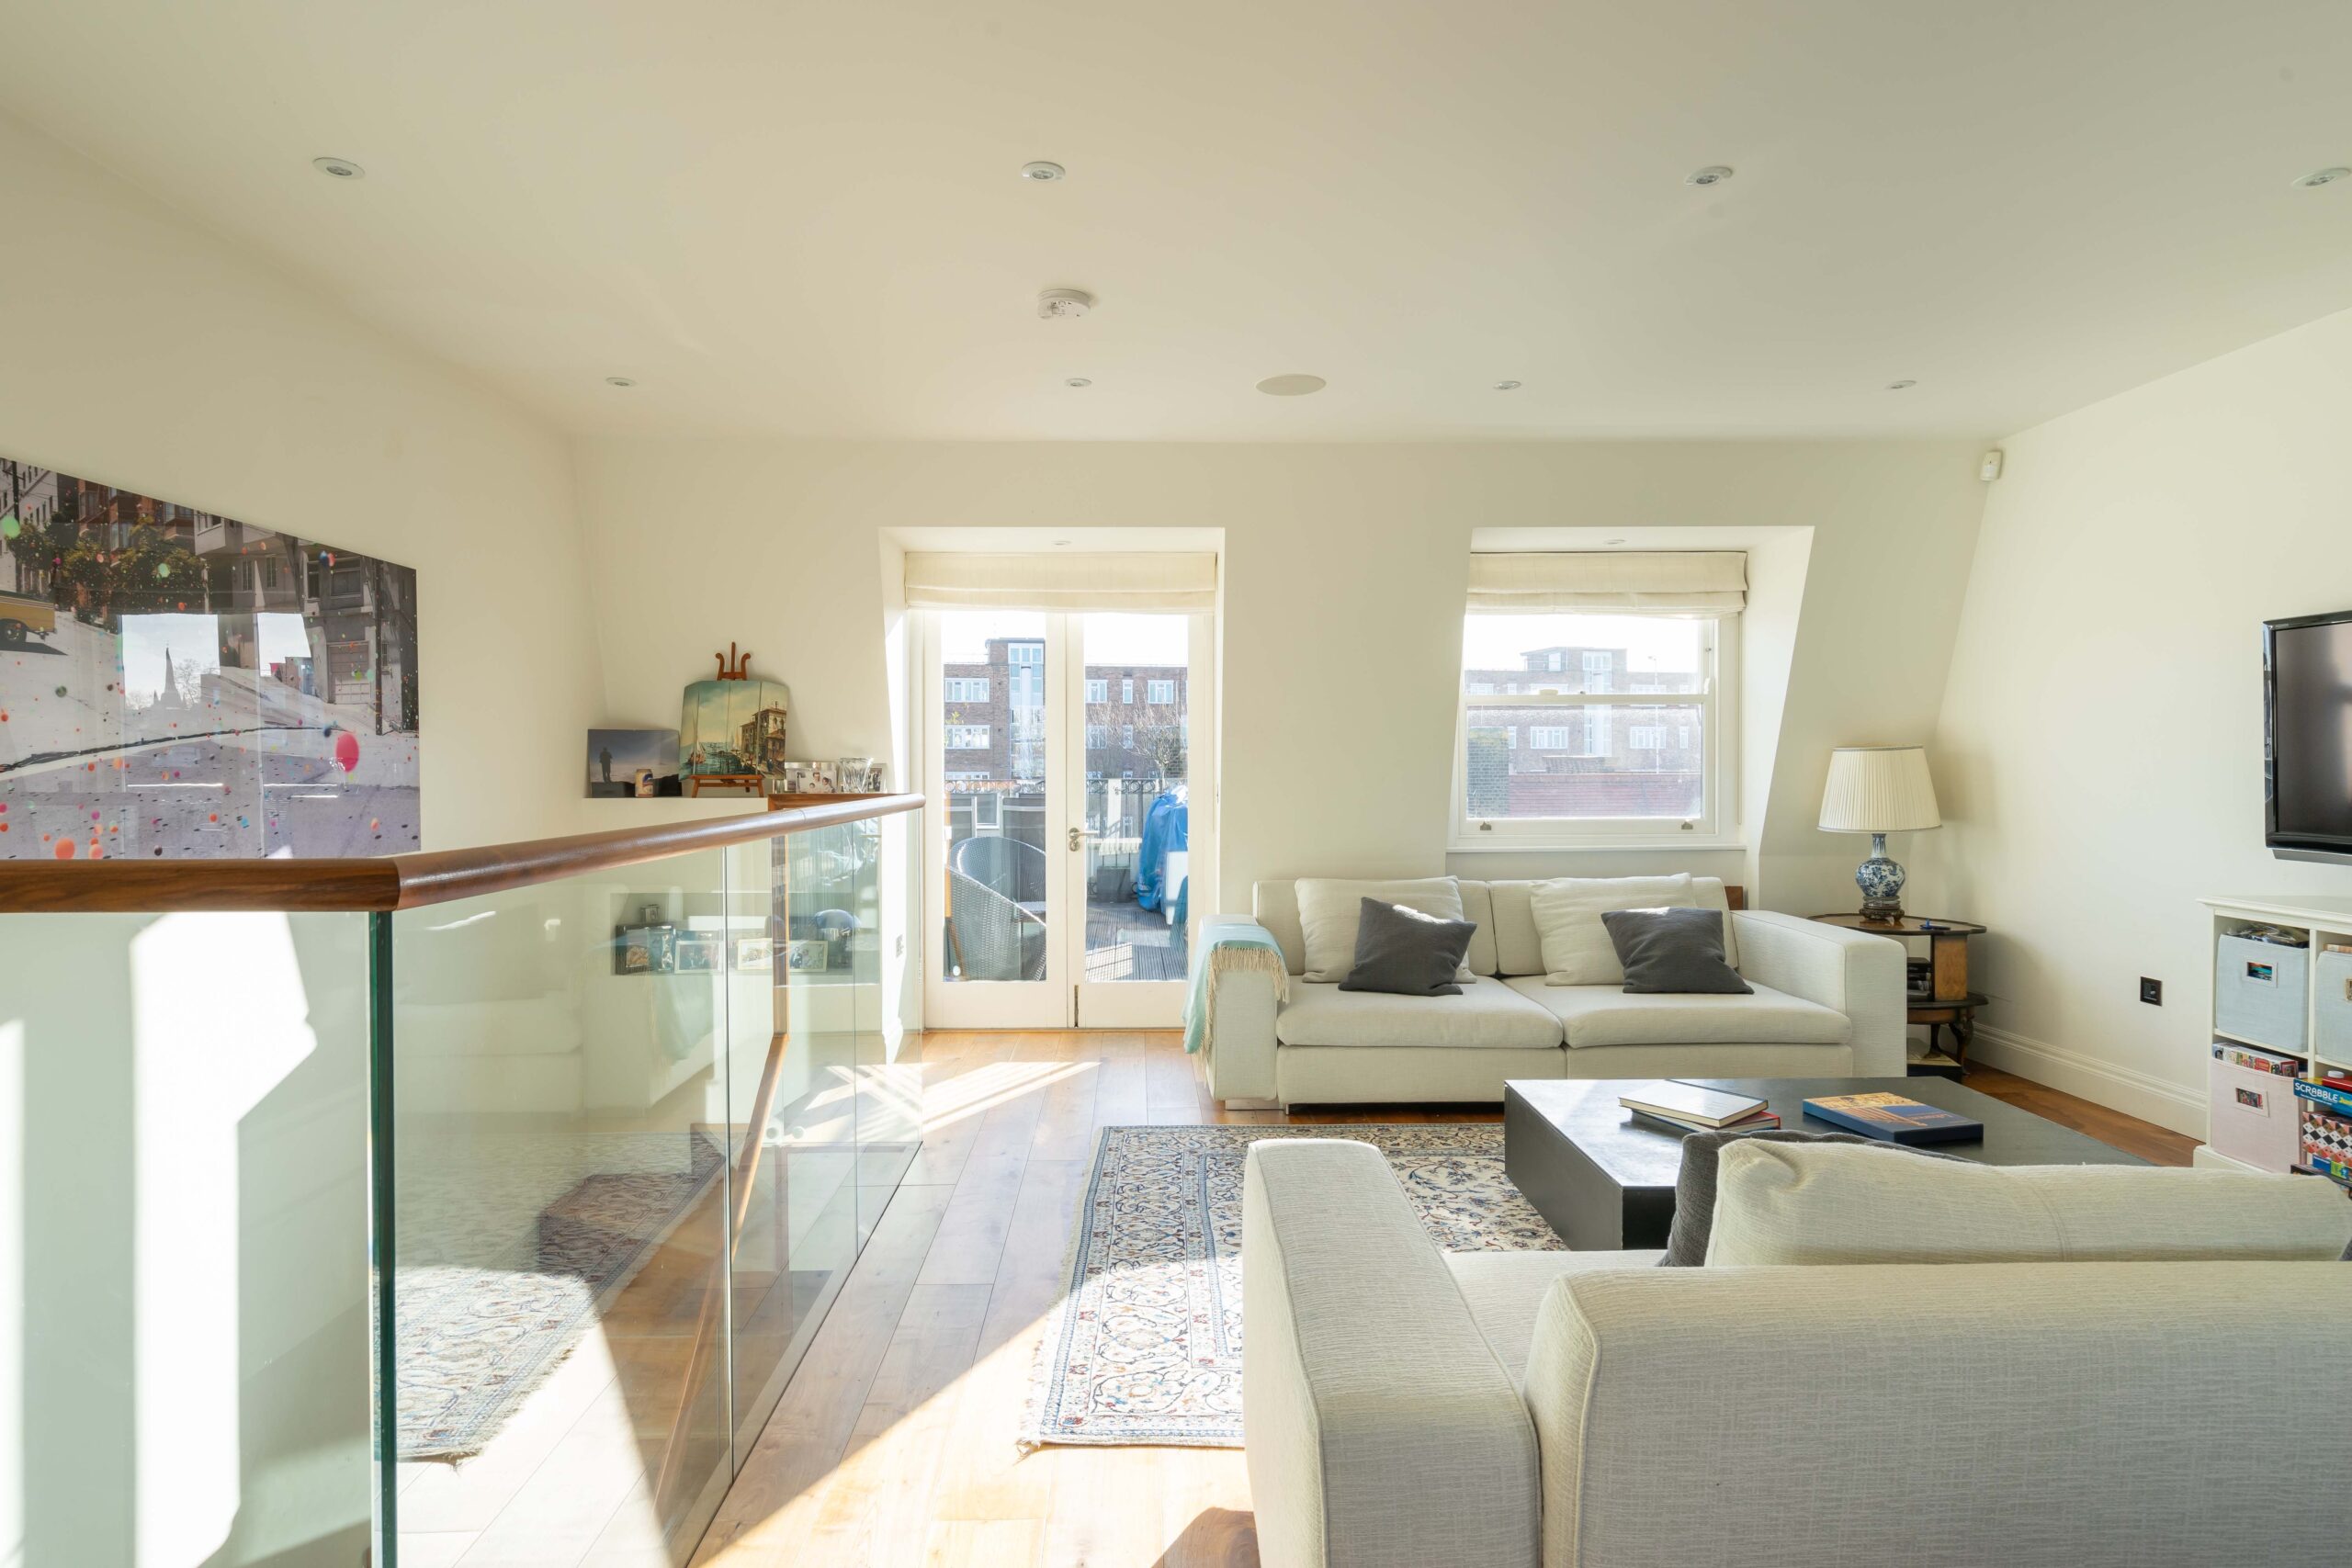 For Sale: Colville Terrace Notting Hill W11 top floor reception room